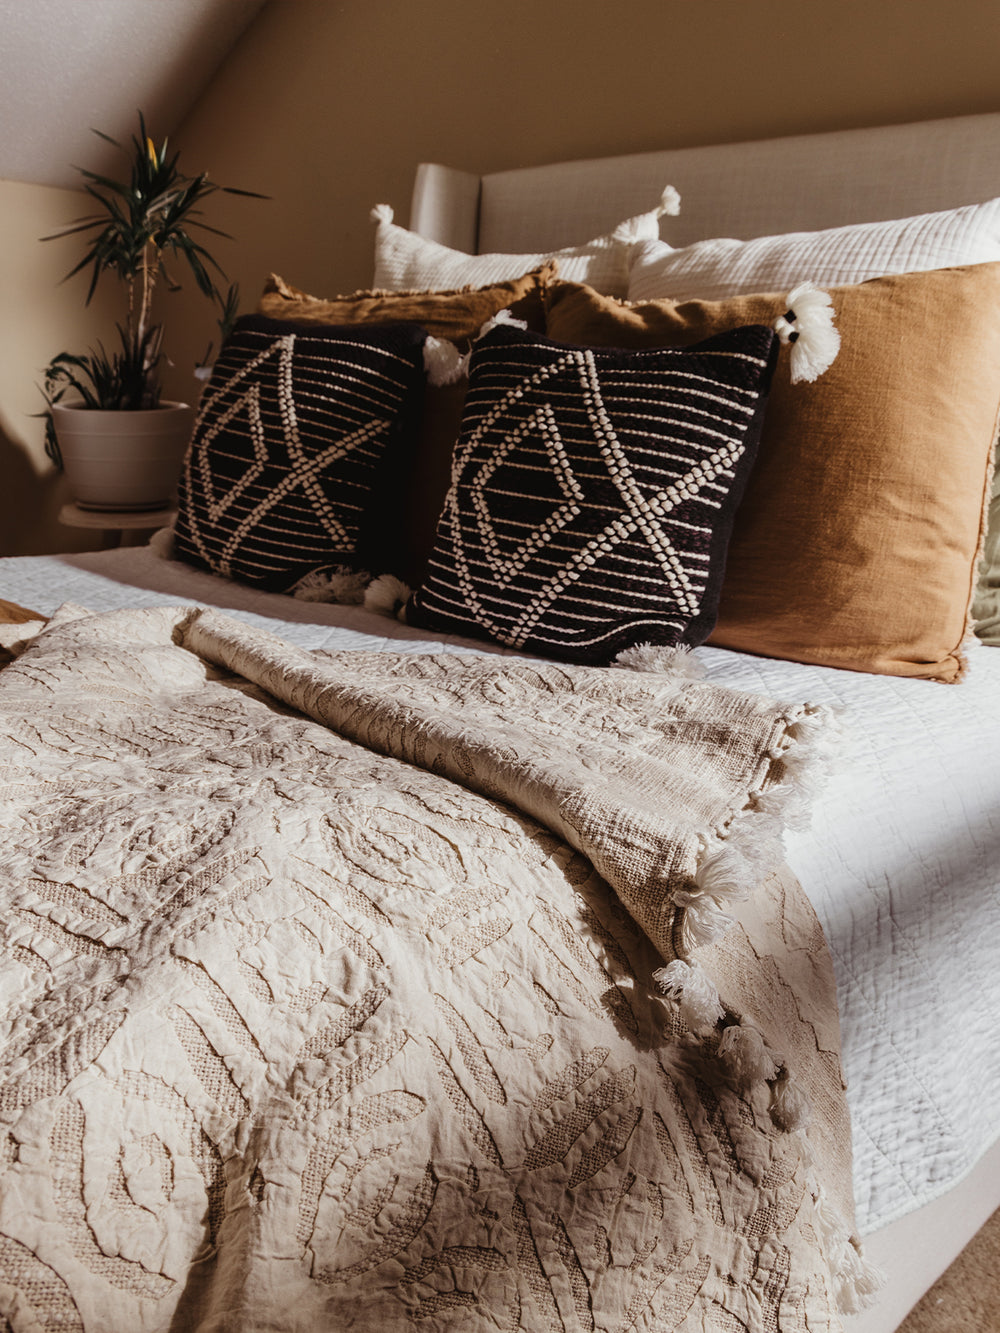 Cream Cutwork throw blanket on cream styled bed in bedroom setting. 